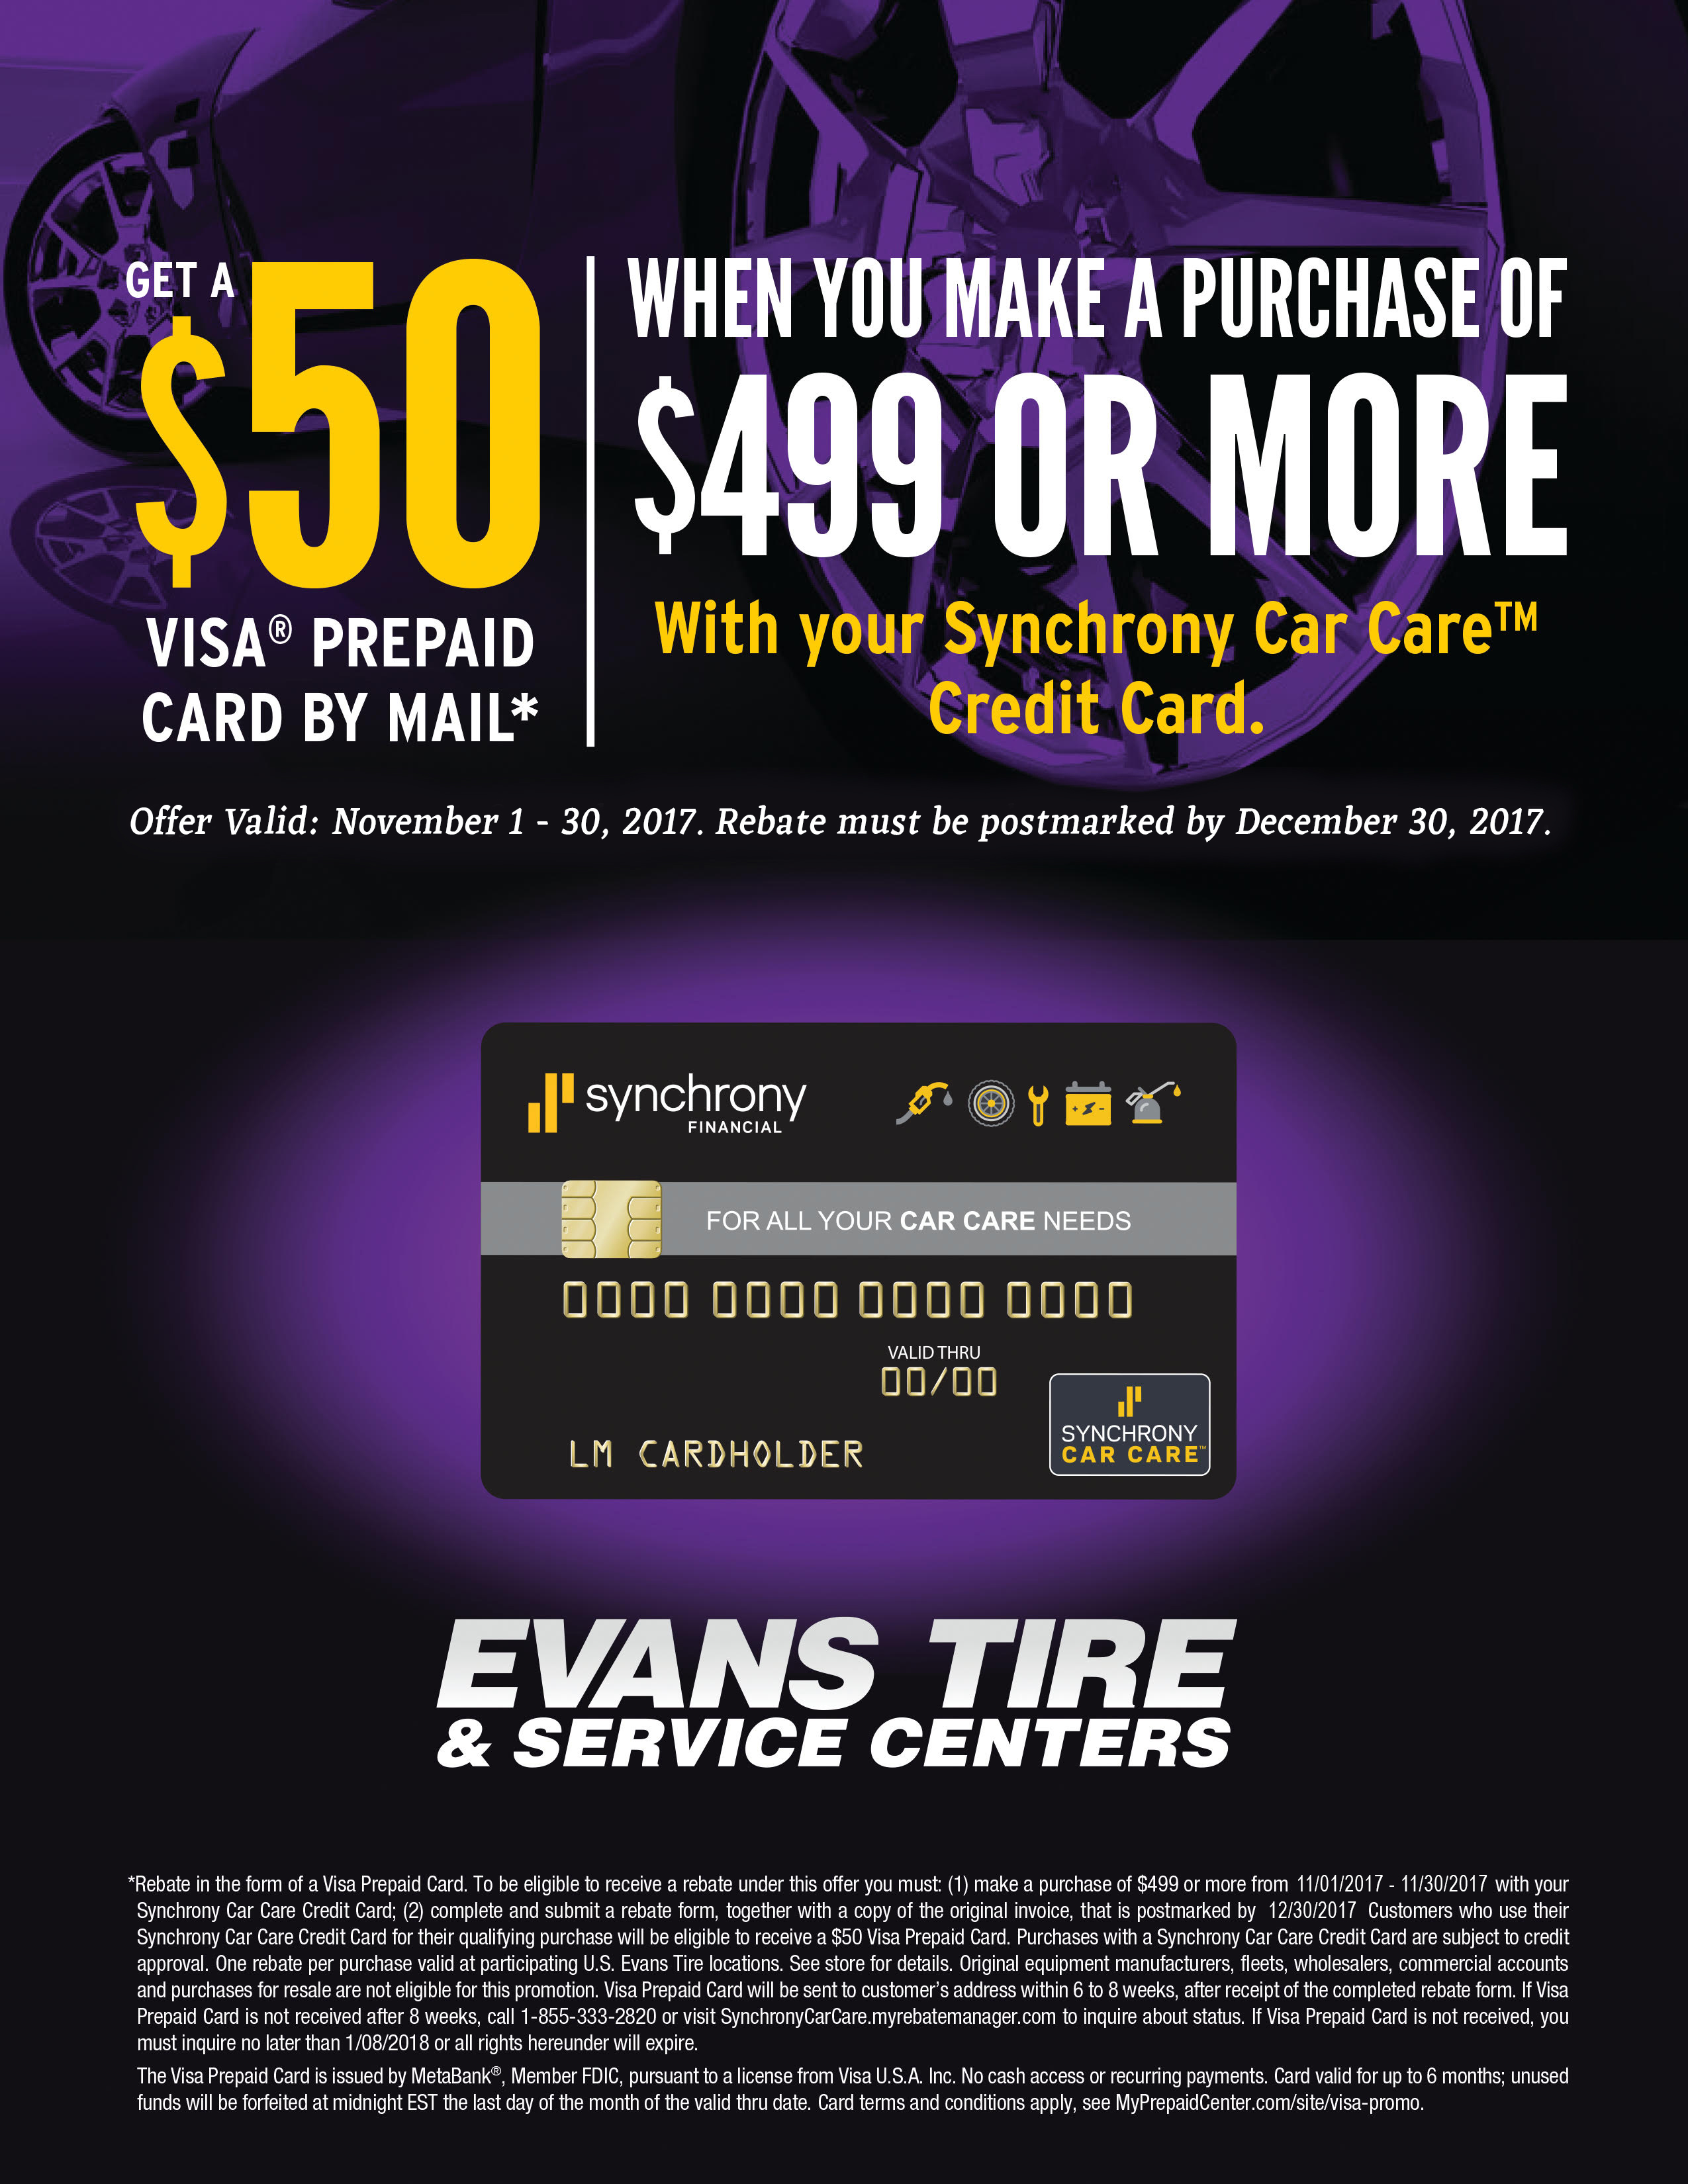 apply-for-credit-evans-tire-service-centers